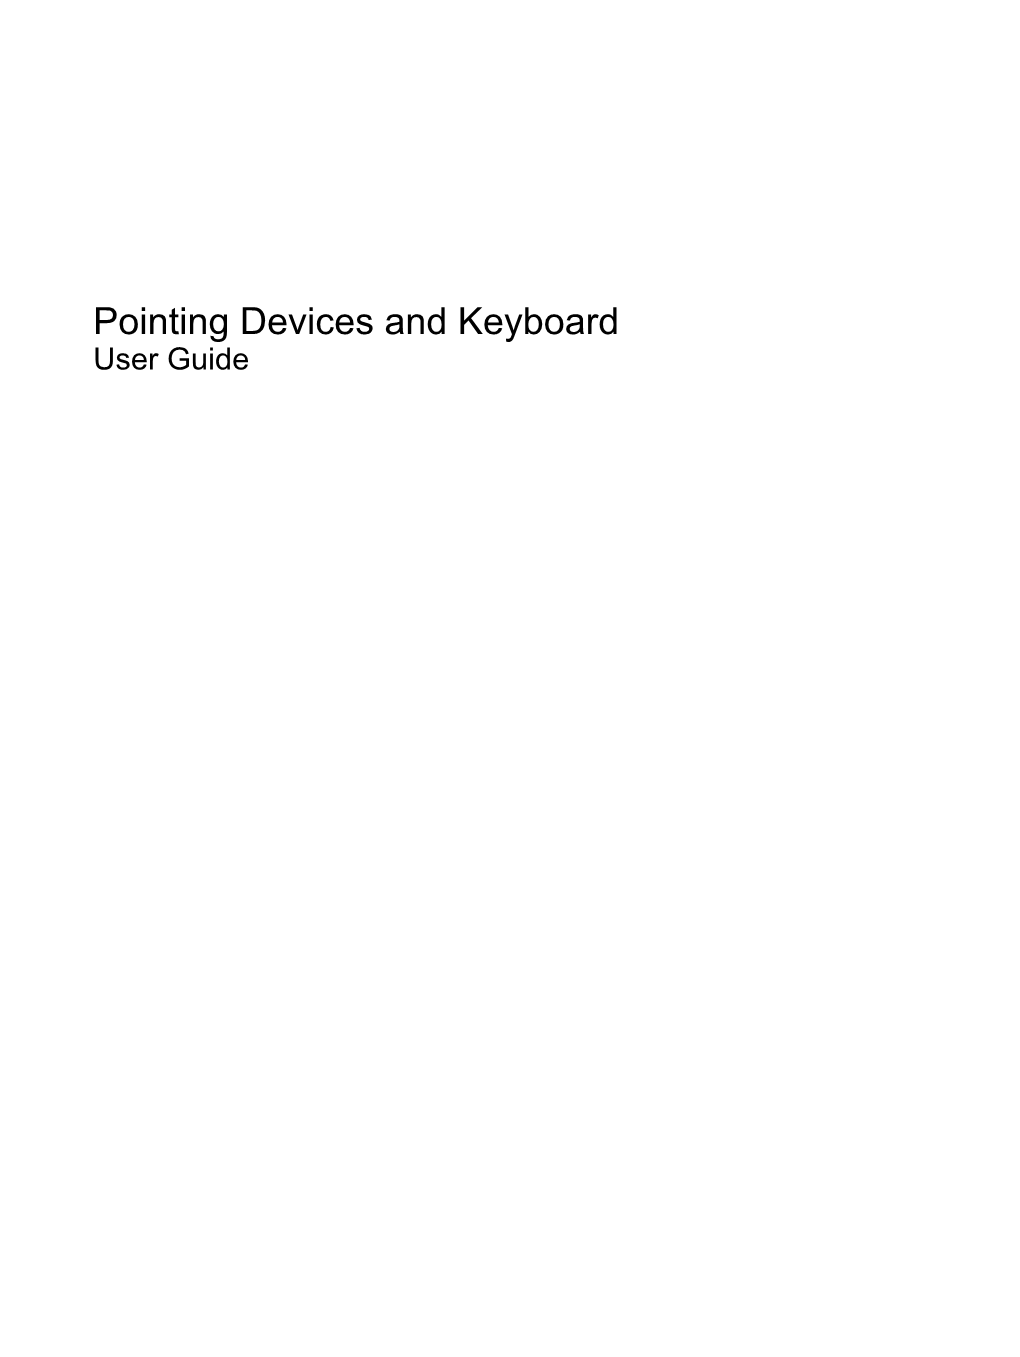 Pointing Devices and Keyboard User Guide © Copyright 2008 Hewlett-Packard Product Notice Development Company, L.P